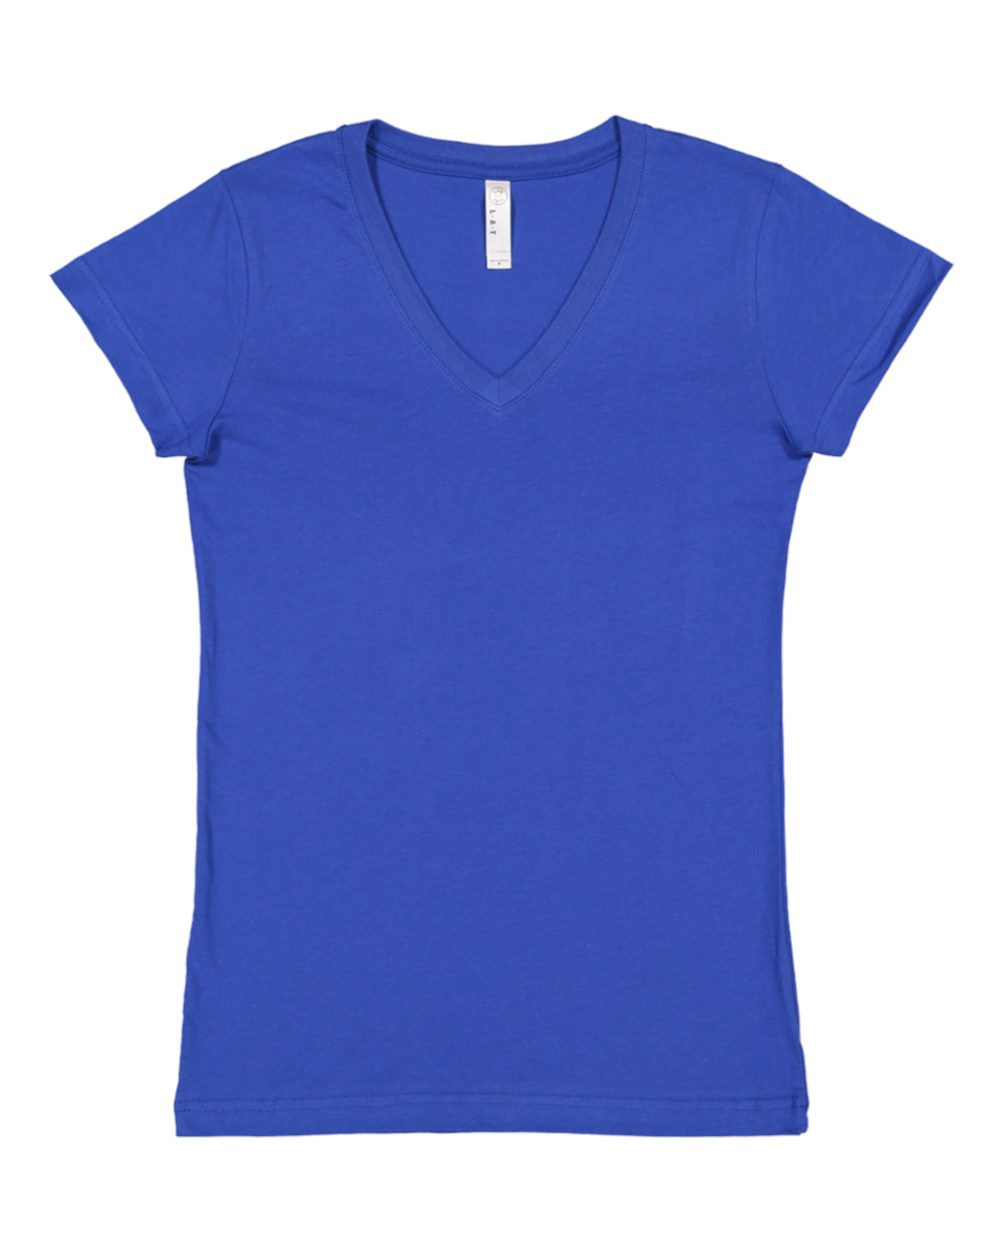 Ladies (Junior) Fitted --  (V-Neck) T-Shirt -- 100% Cotton -- Royal Color